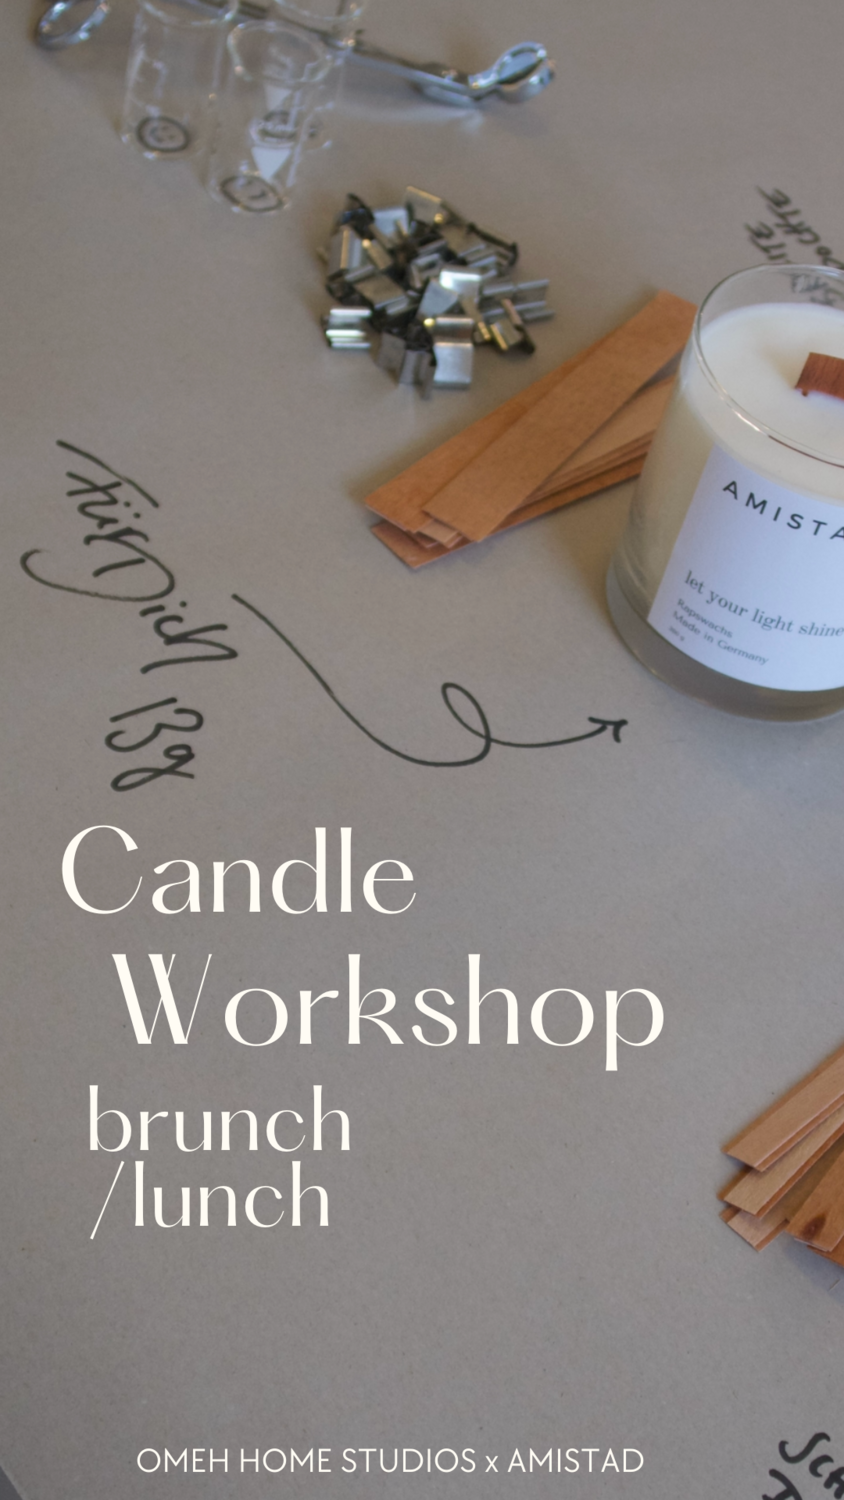 Candle Workshop with Brunch 16.4